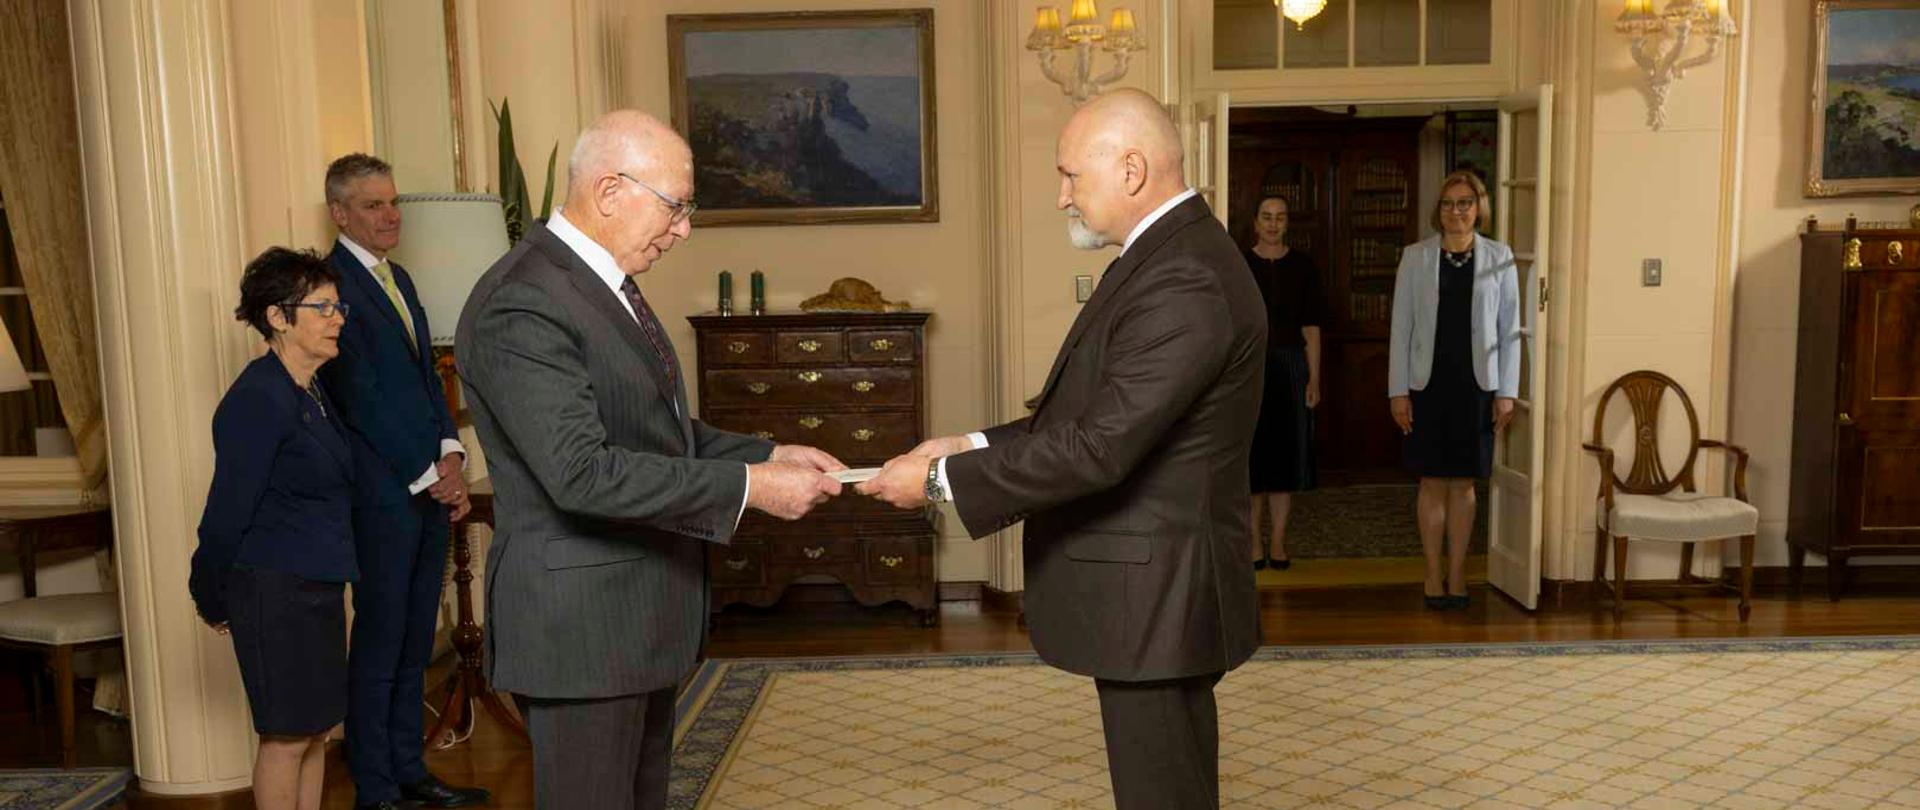 Ceremony of presentation of the Letters of Credence to the Governor-General HE David Hurley 